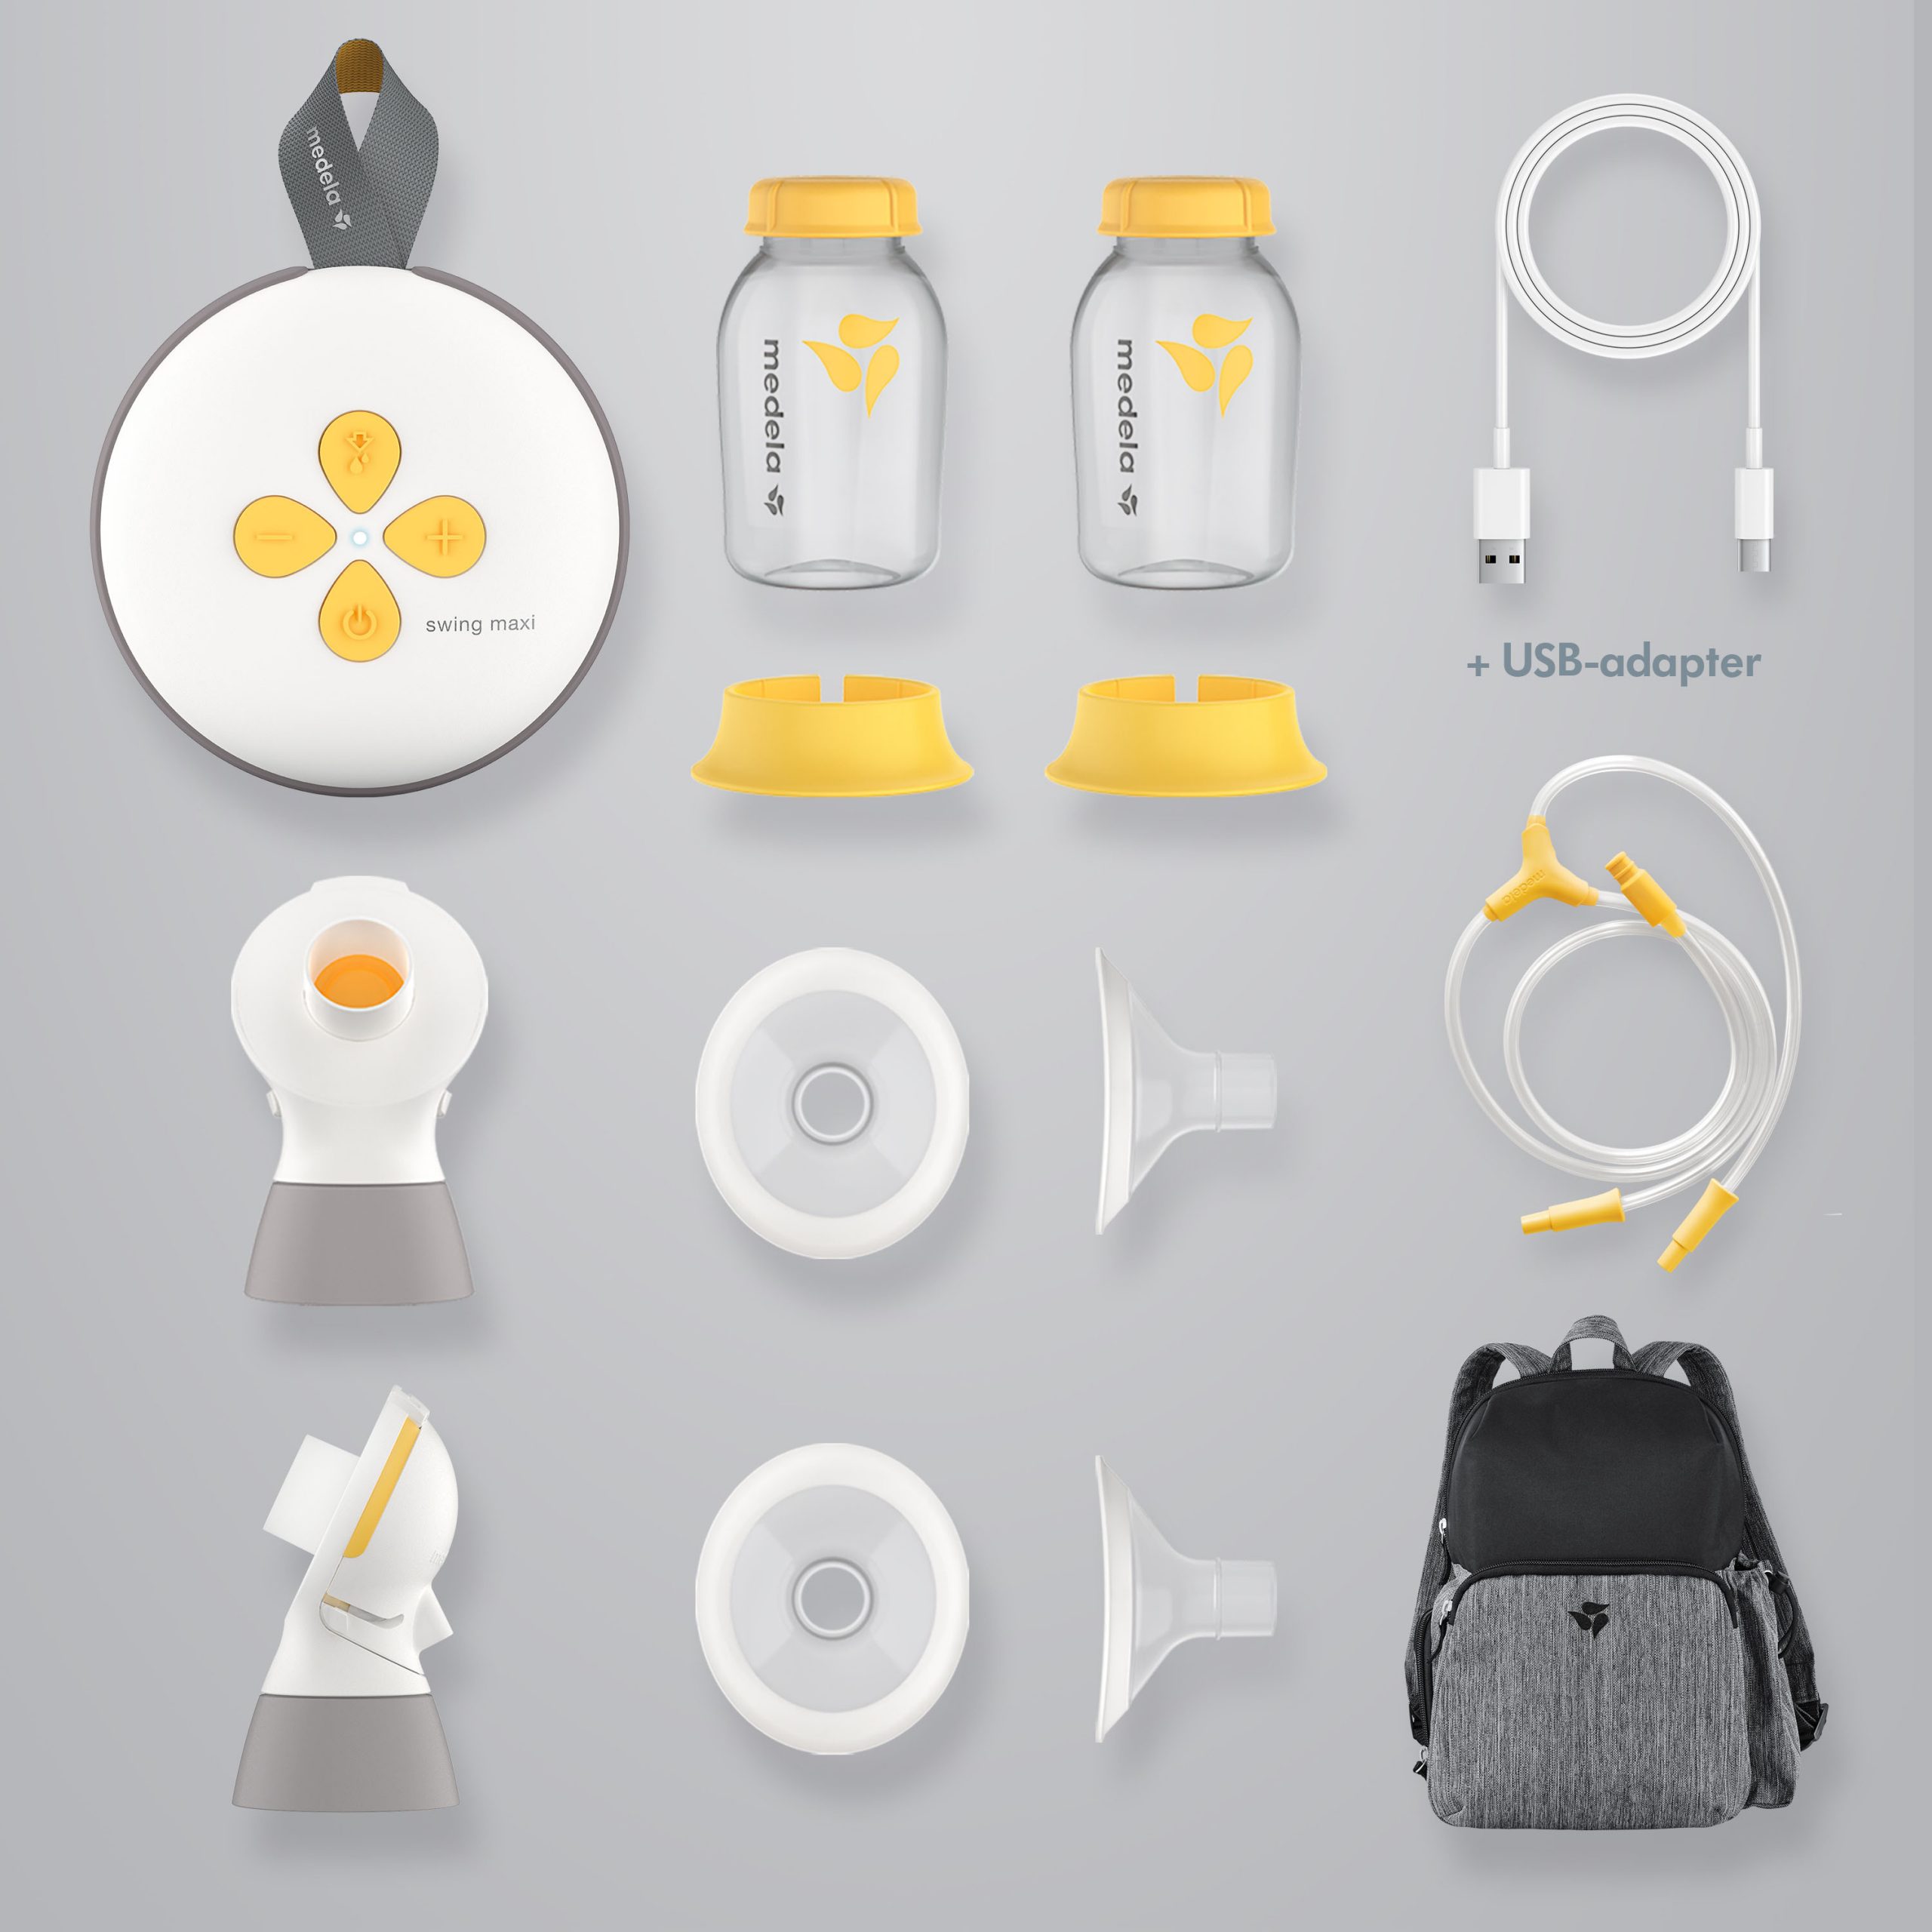 Medela Swing Maxi™ Double Electric Breast Pump with Backpack